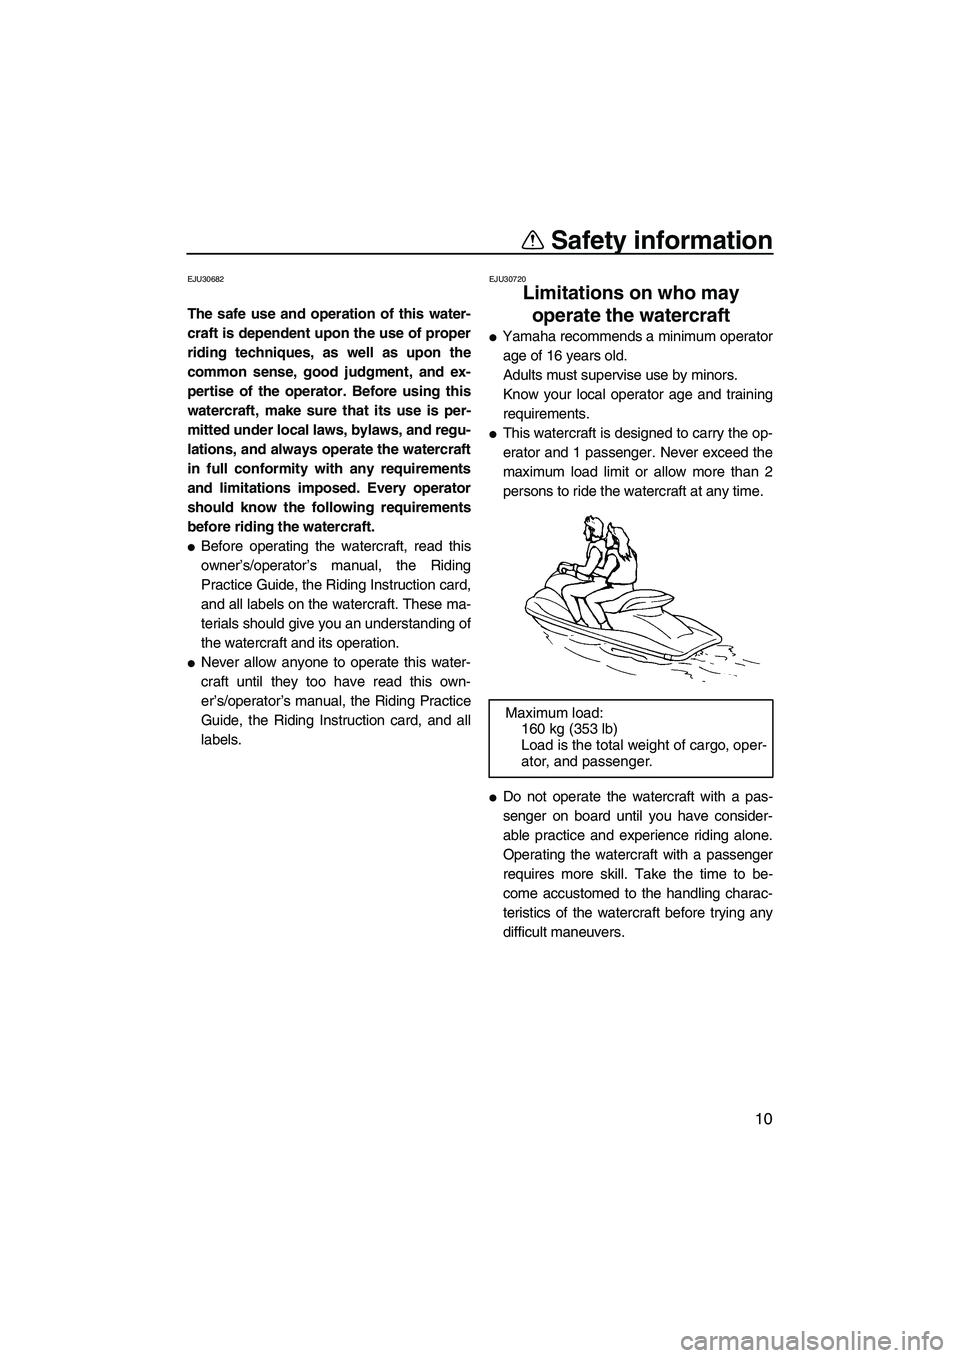 YAMAHA FZR SVHO 2009 User Guide Safety information
10
EJU30682
The safe use and operation of this water-
craft is dependent upon the use of proper
riding techniques, as well as upon the
common sense, good judgment, and ex-
pertise o